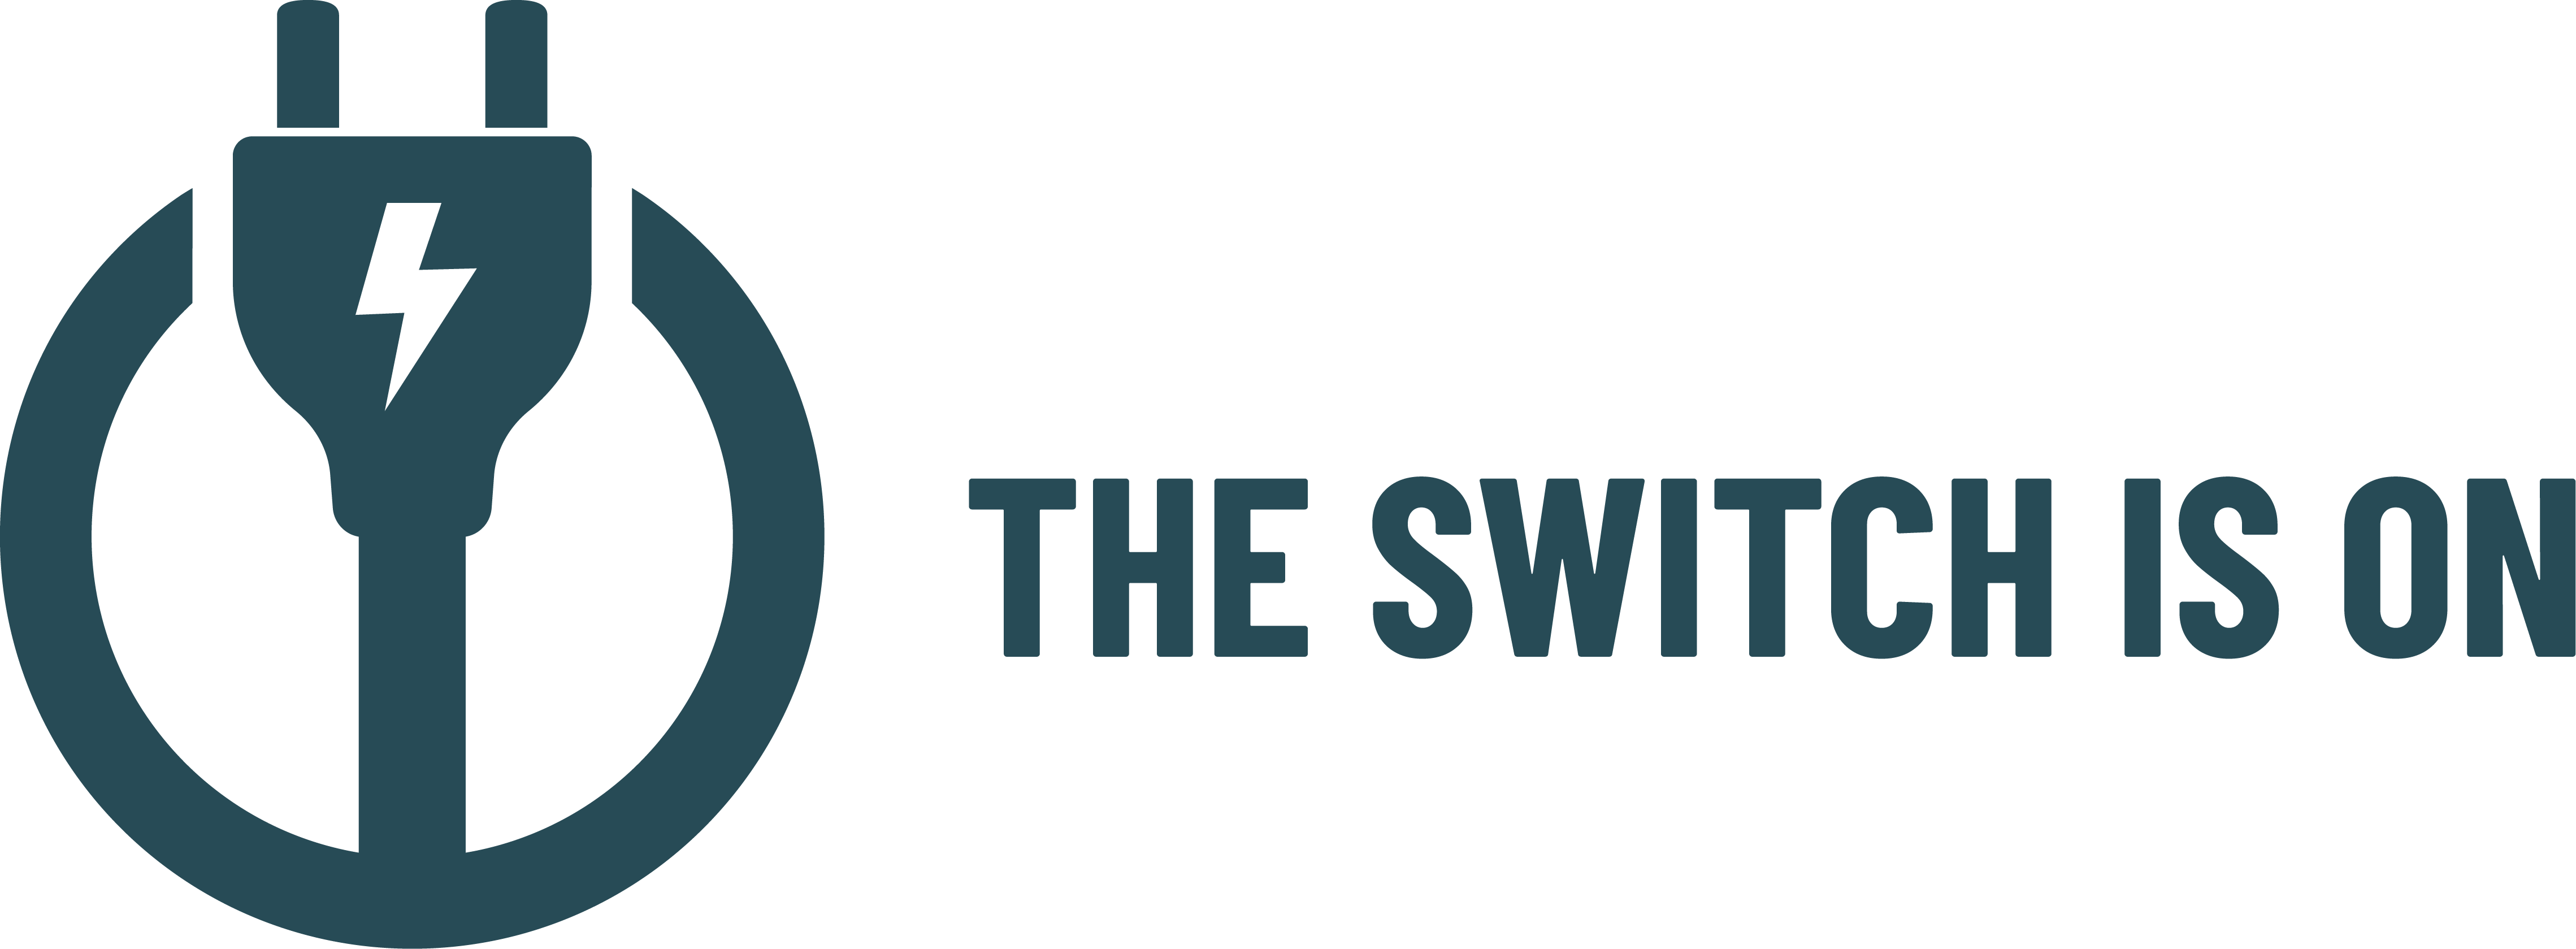 Make the Switch to an All-Electric | Switch is On